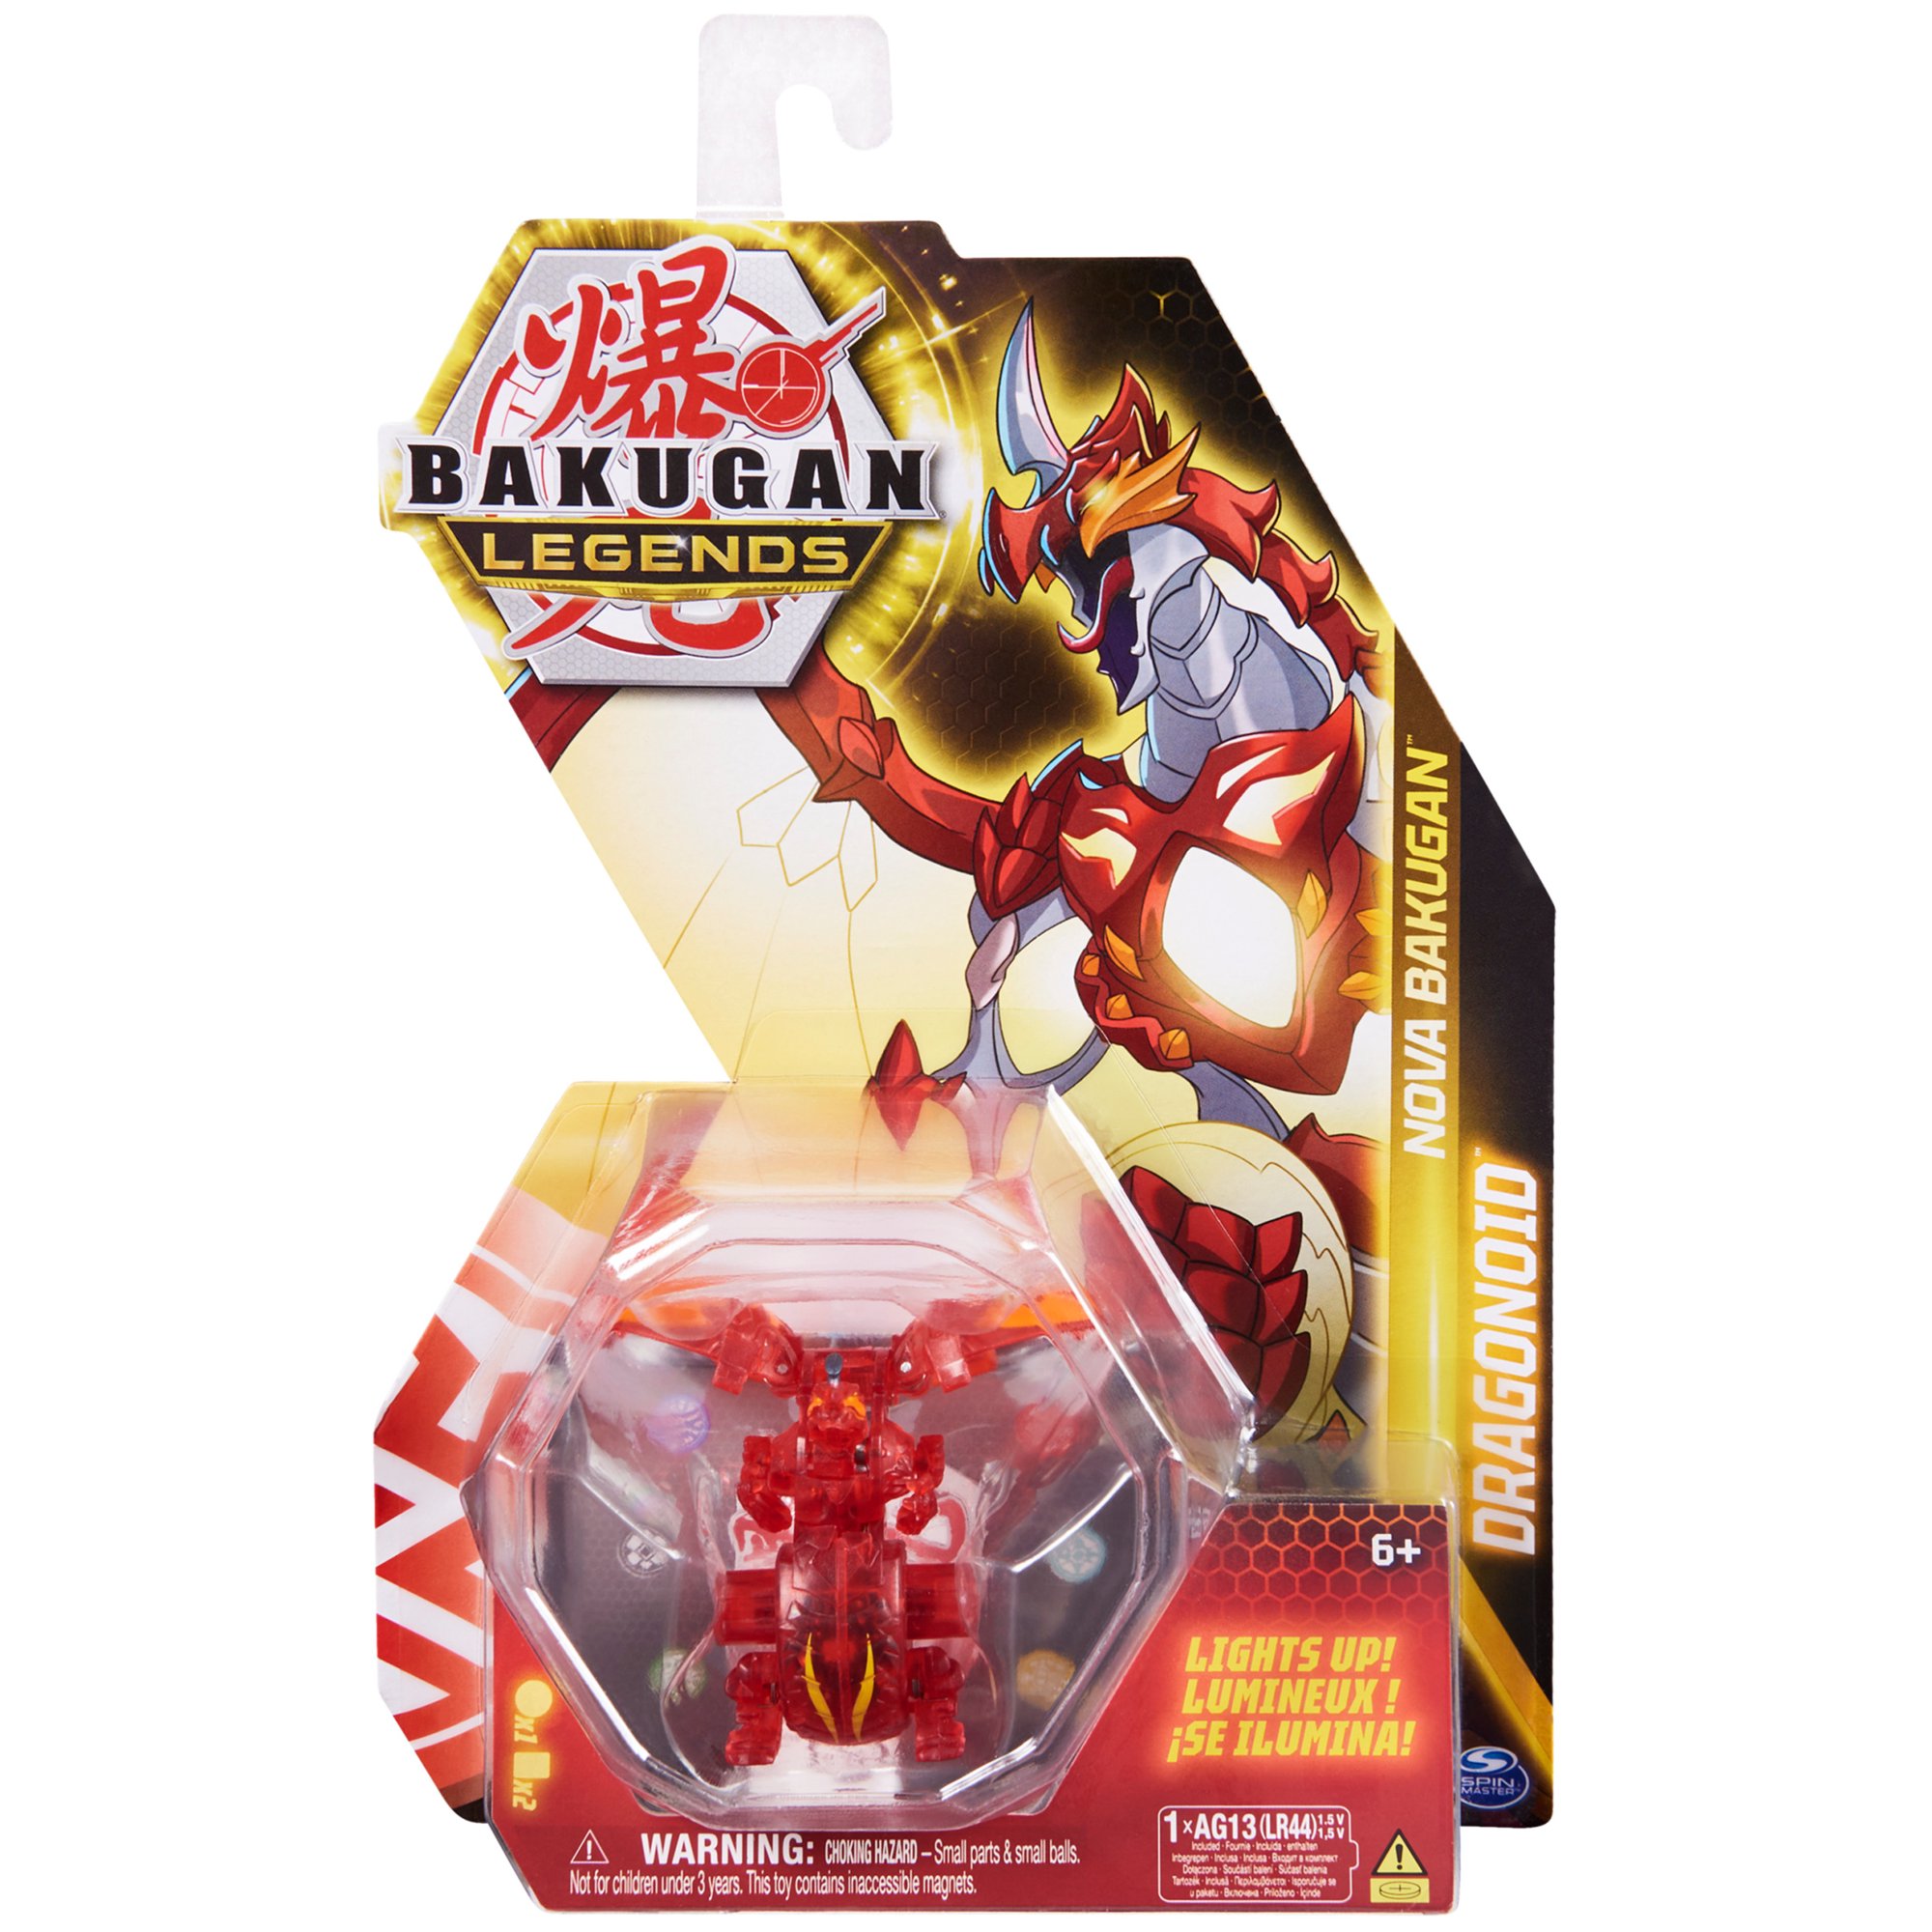 Bakugan Wiki on Twitter: now have product images for the first Nova Bakugan of Bakugan: Legends! There exist two variations of Nova Pegatrix, and packages do not appear